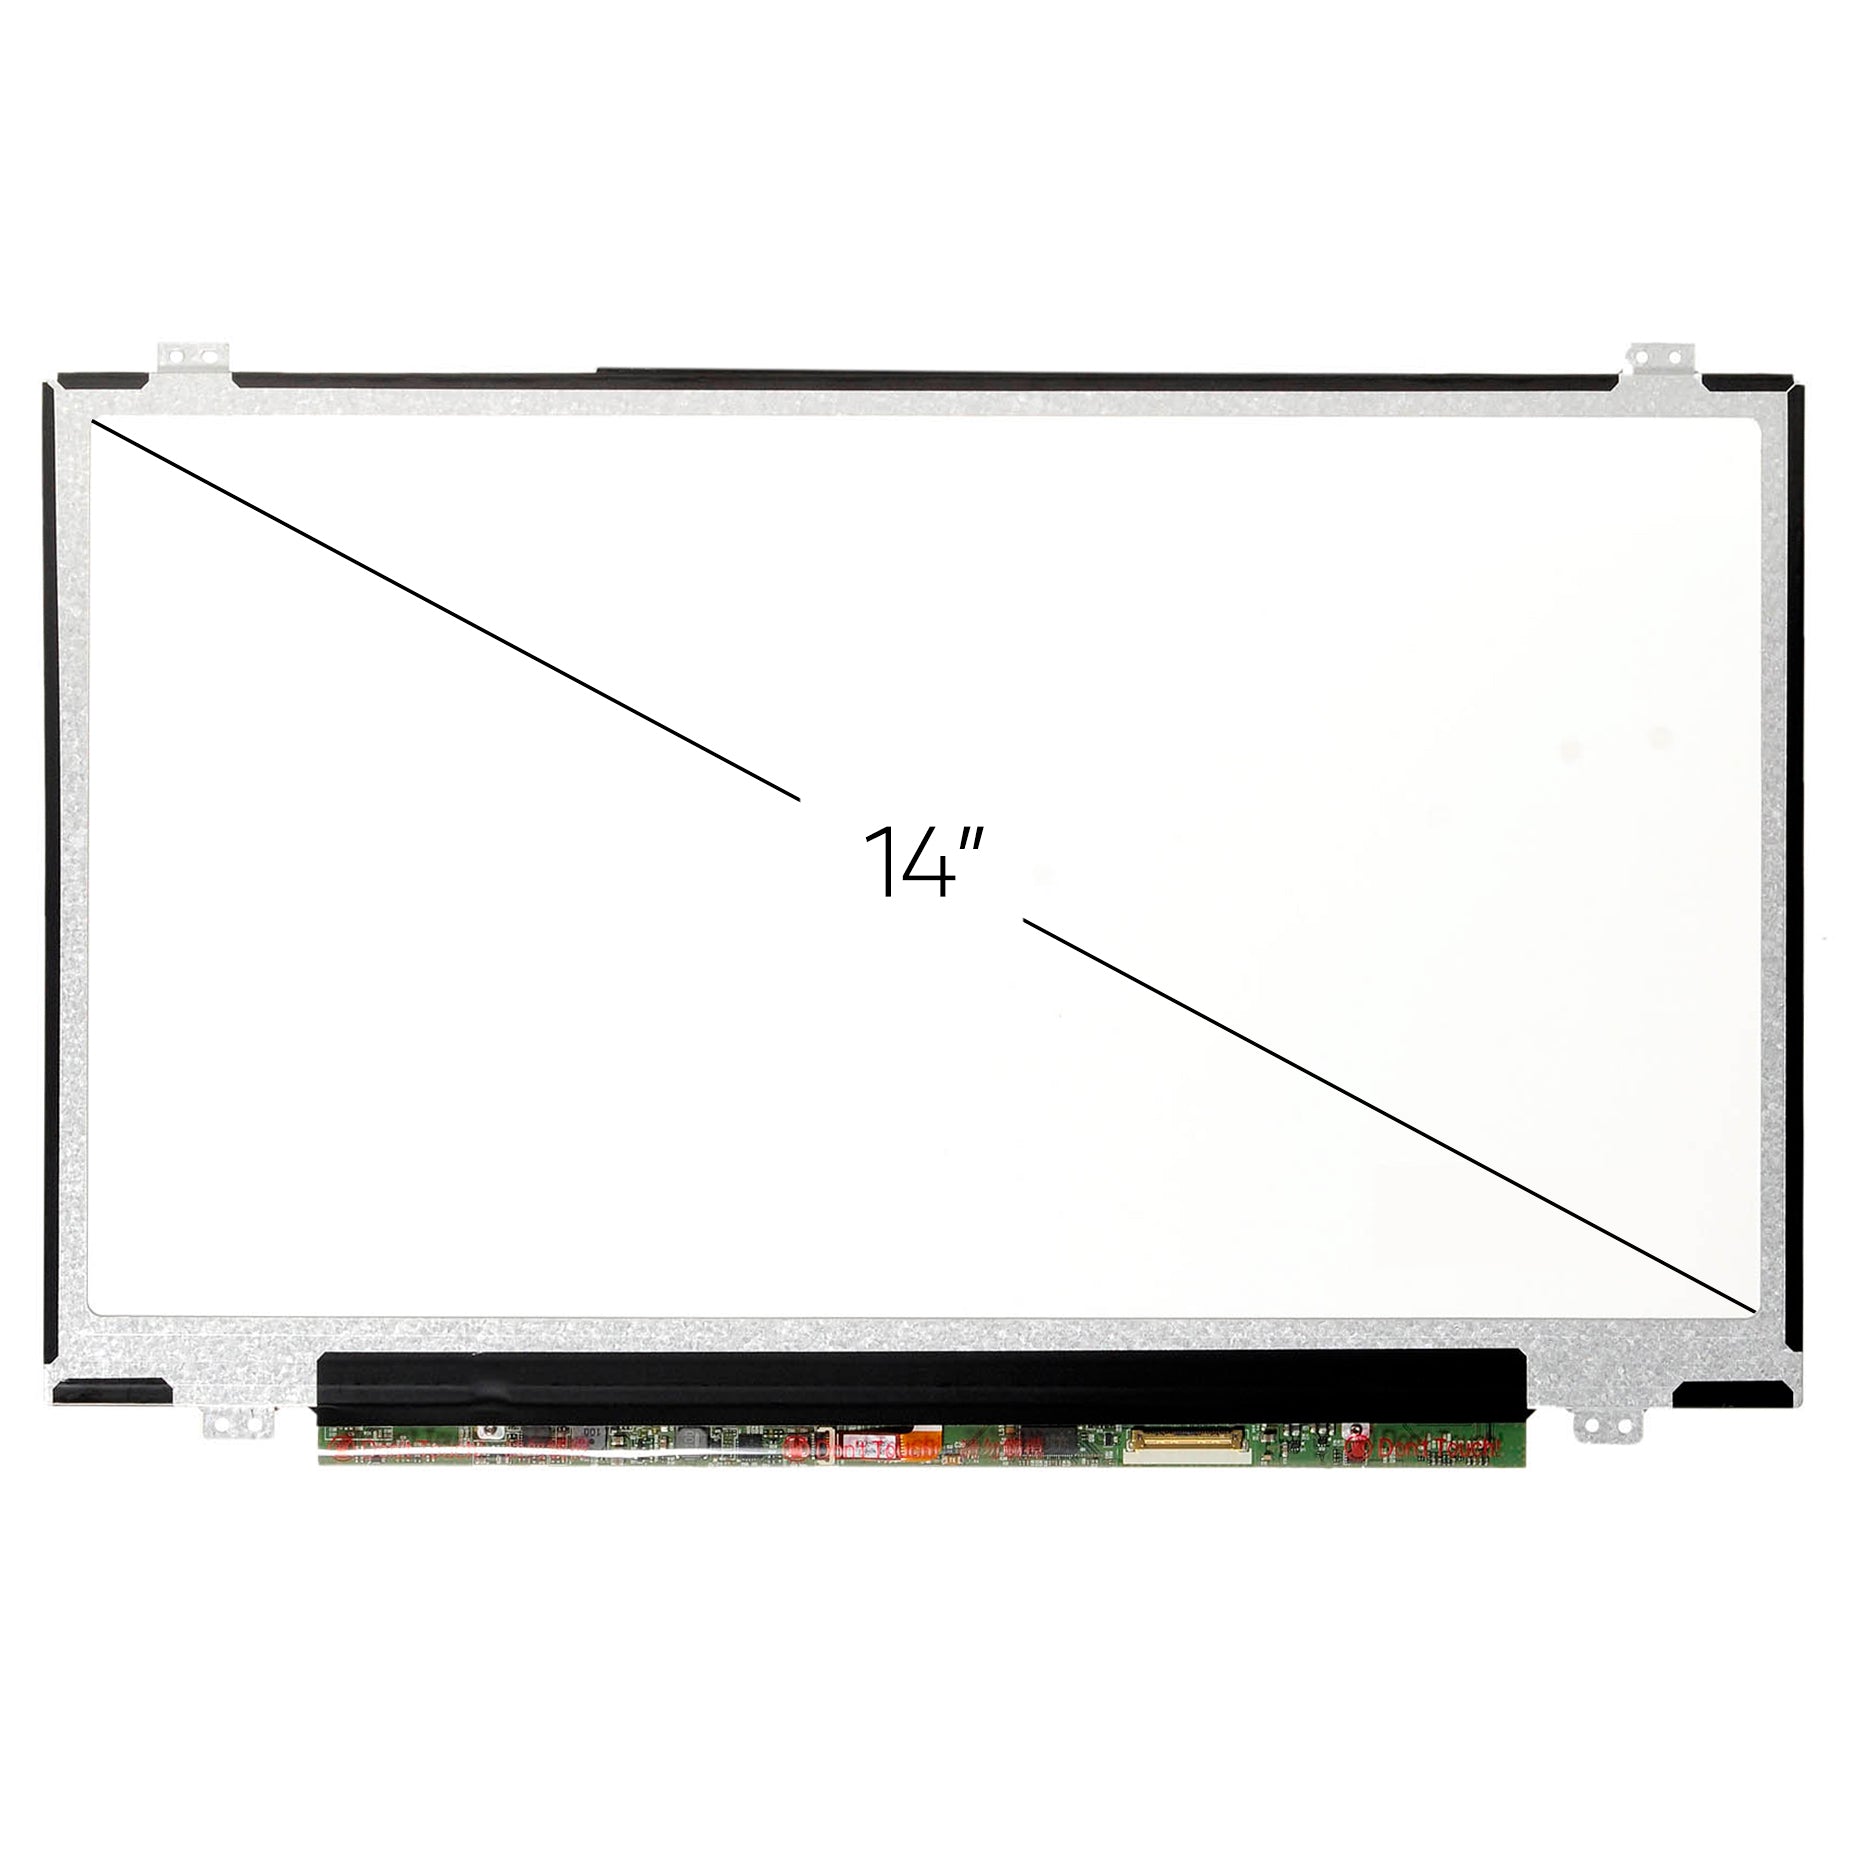 Screen Replacement for Lenovo Thinkpad T470P FHD 1920x1080 IPS Matte LCD LED Display